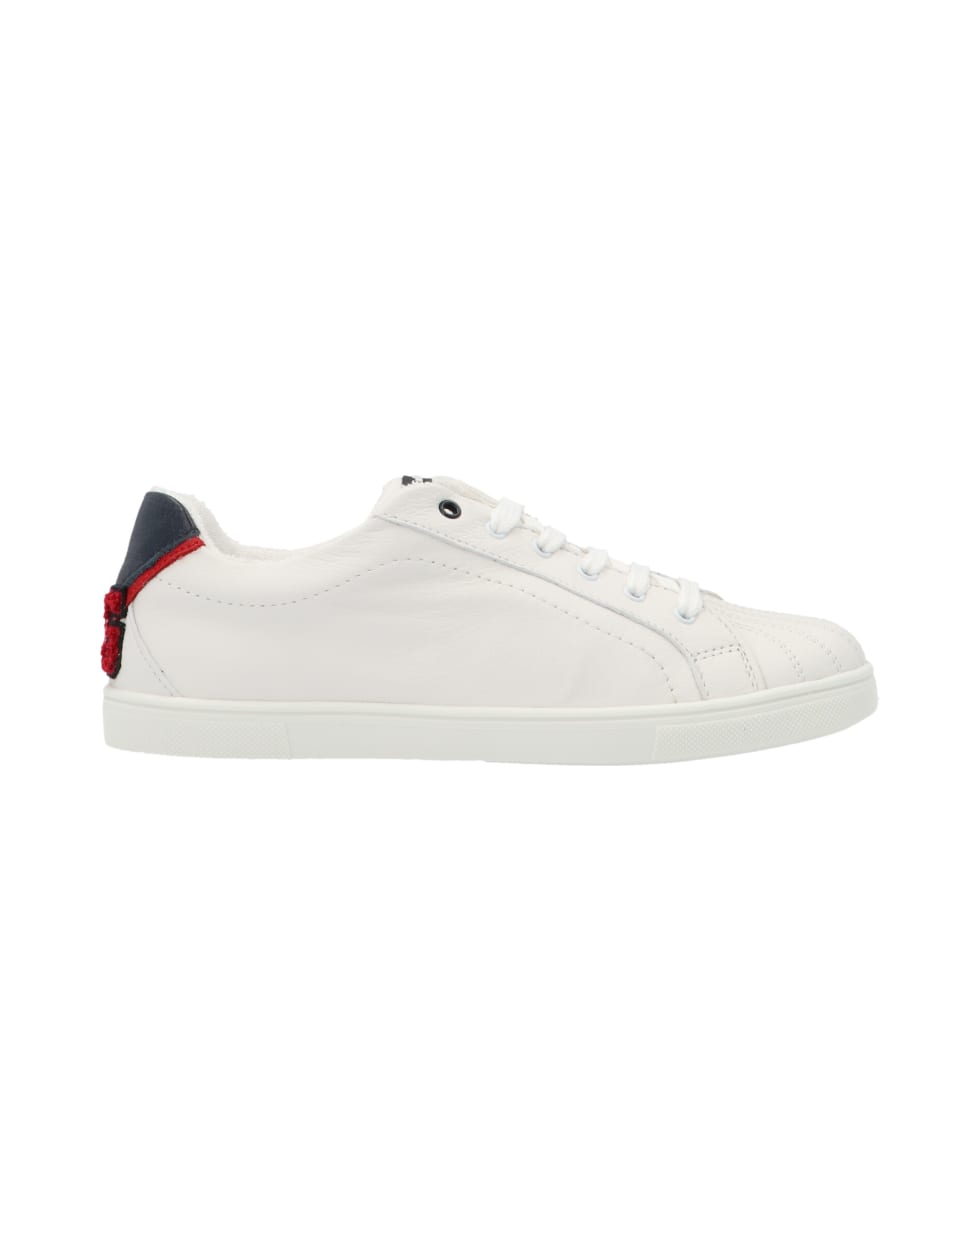 Dolce & Gabbana 'back To School' Shoes - White